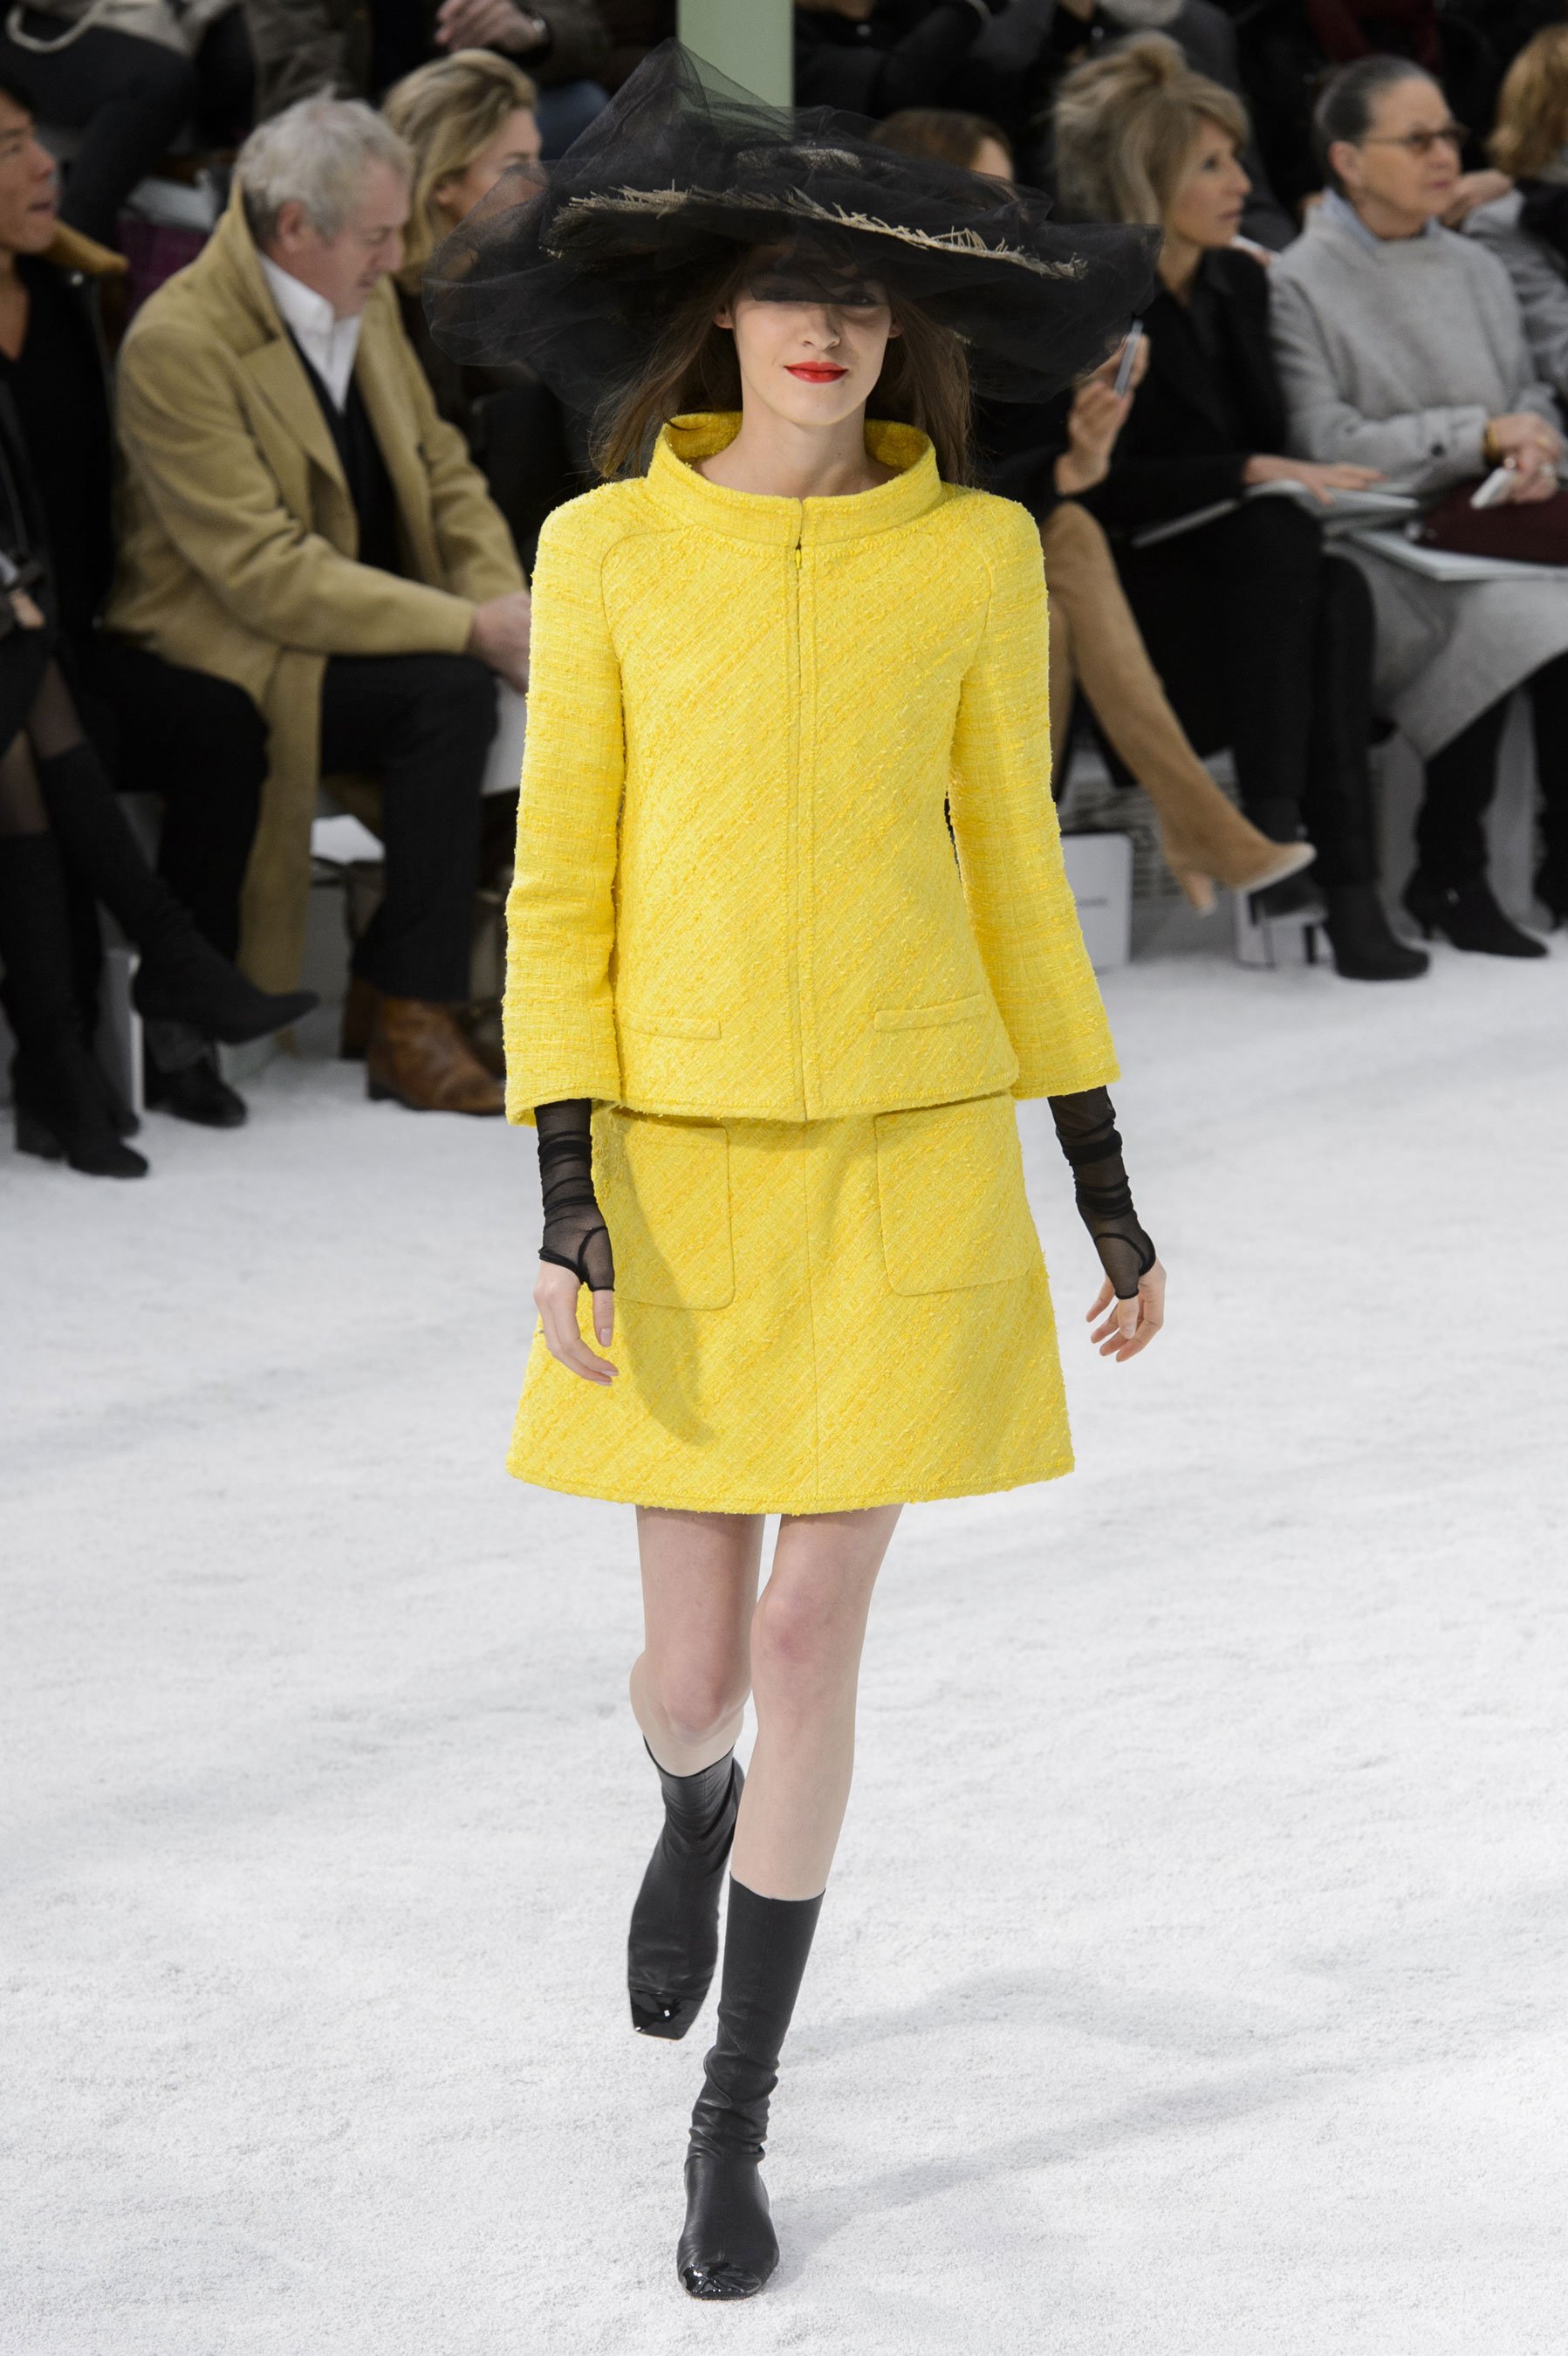 chanel haute couture spring 2015 pfw 6 kremi